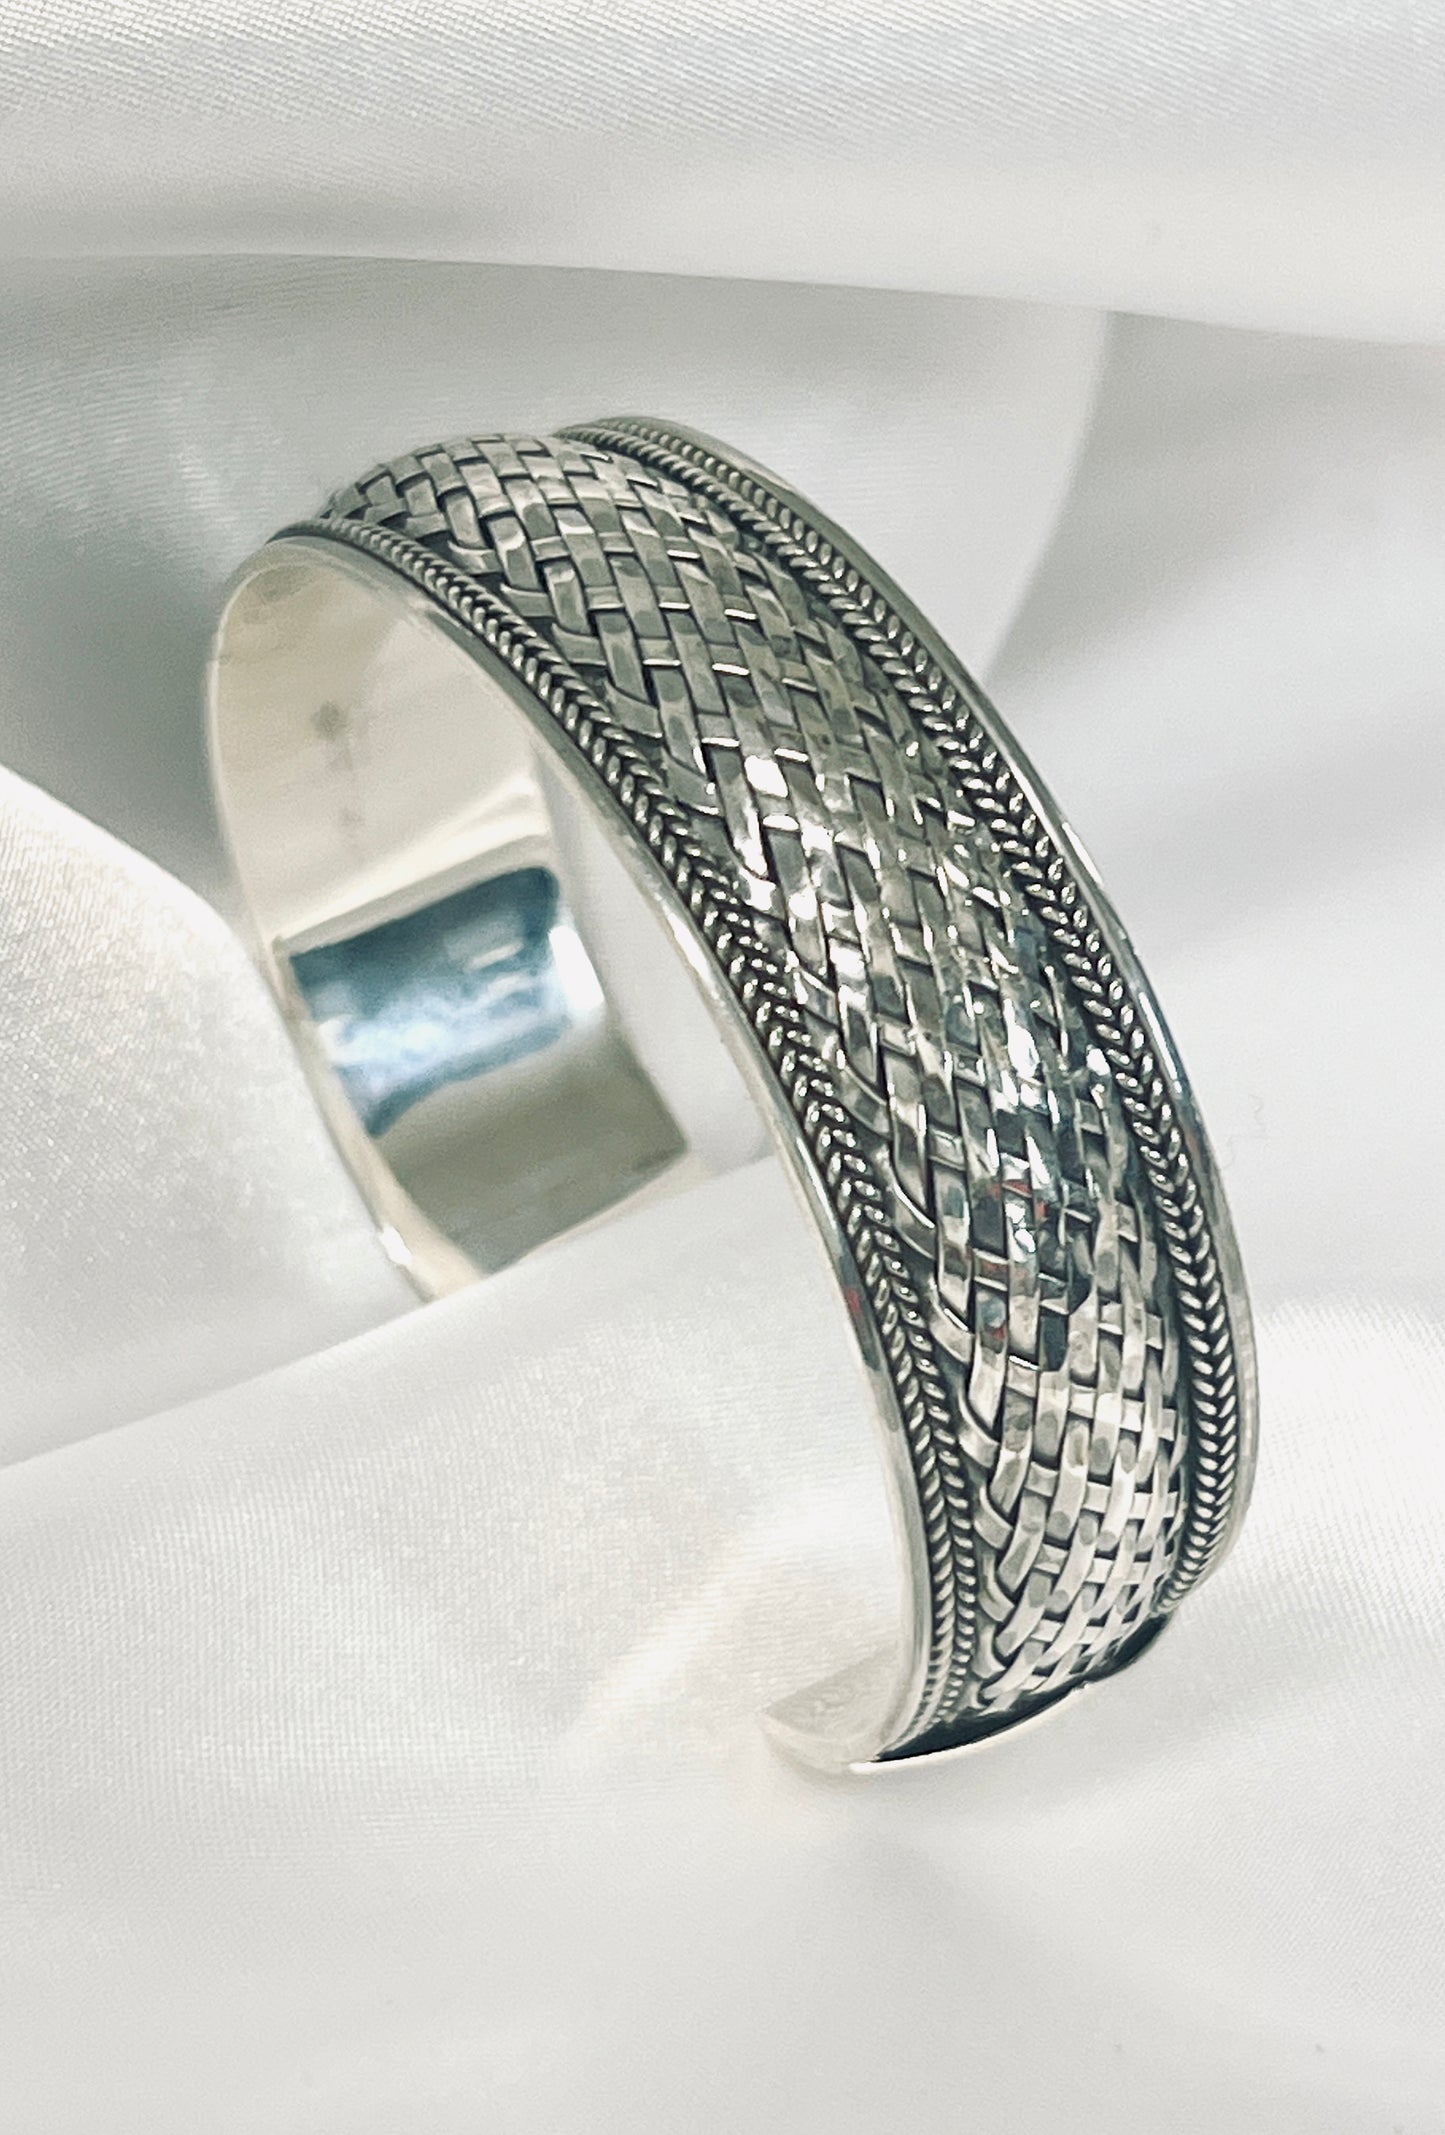 A Super Silver Woven Silver cuff bracelet with an oxidized basket weave design, displayed on a white cloth.